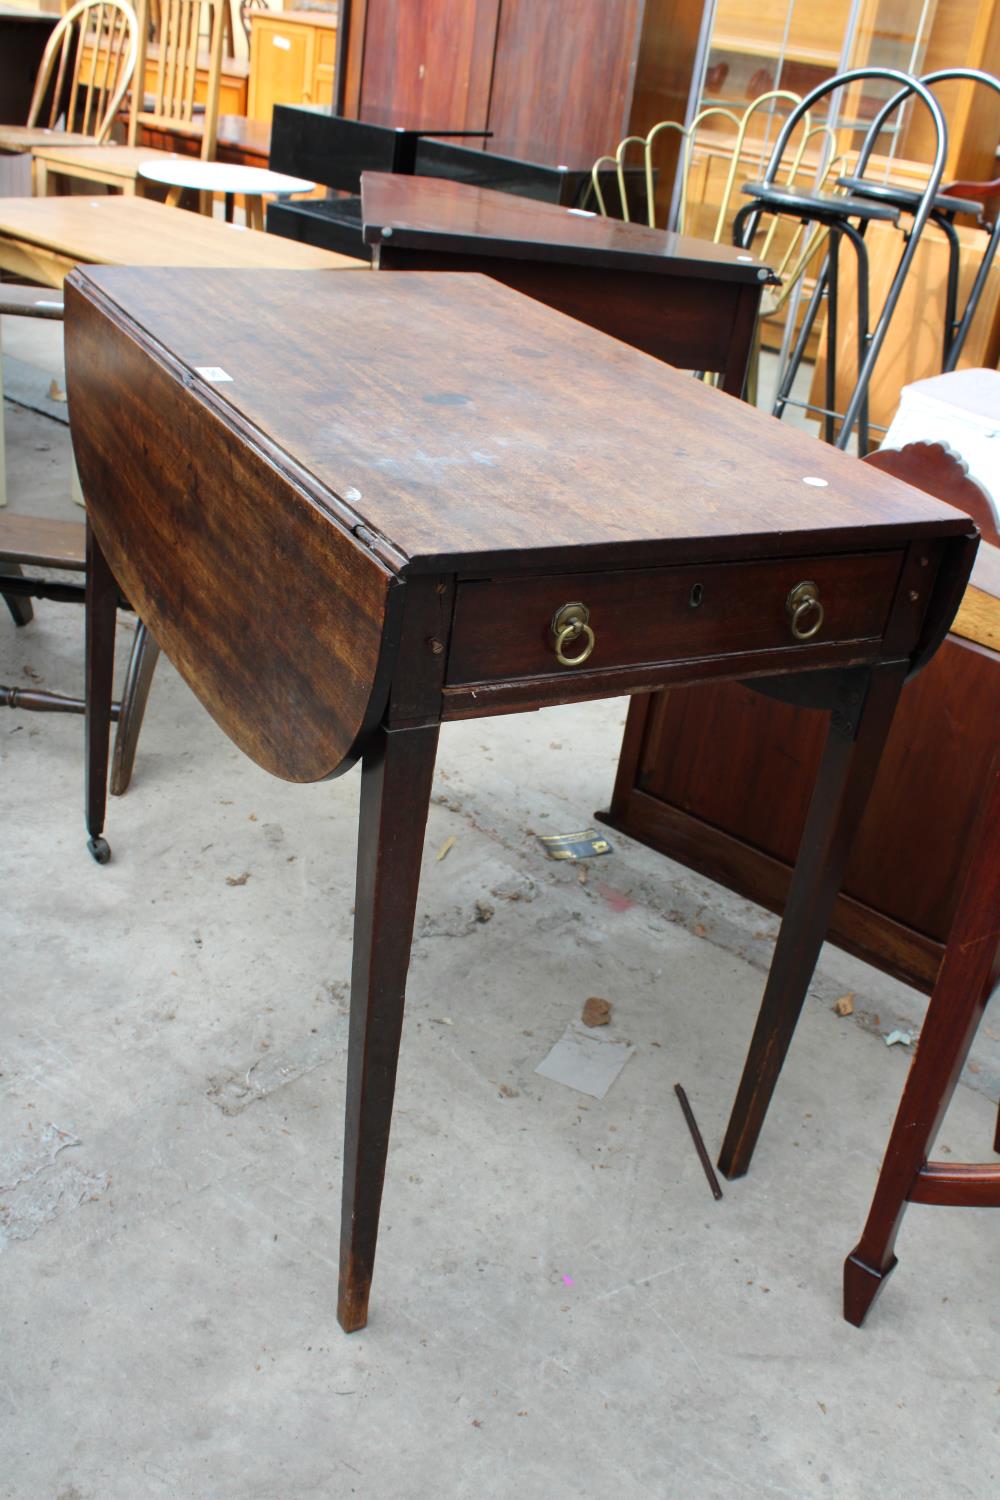 A 19TH CENTURY MAHOGANY PEMBROKE TABLE WITH SINGLE DRAWER AND SHAM DRAWER - Image 3 of 3